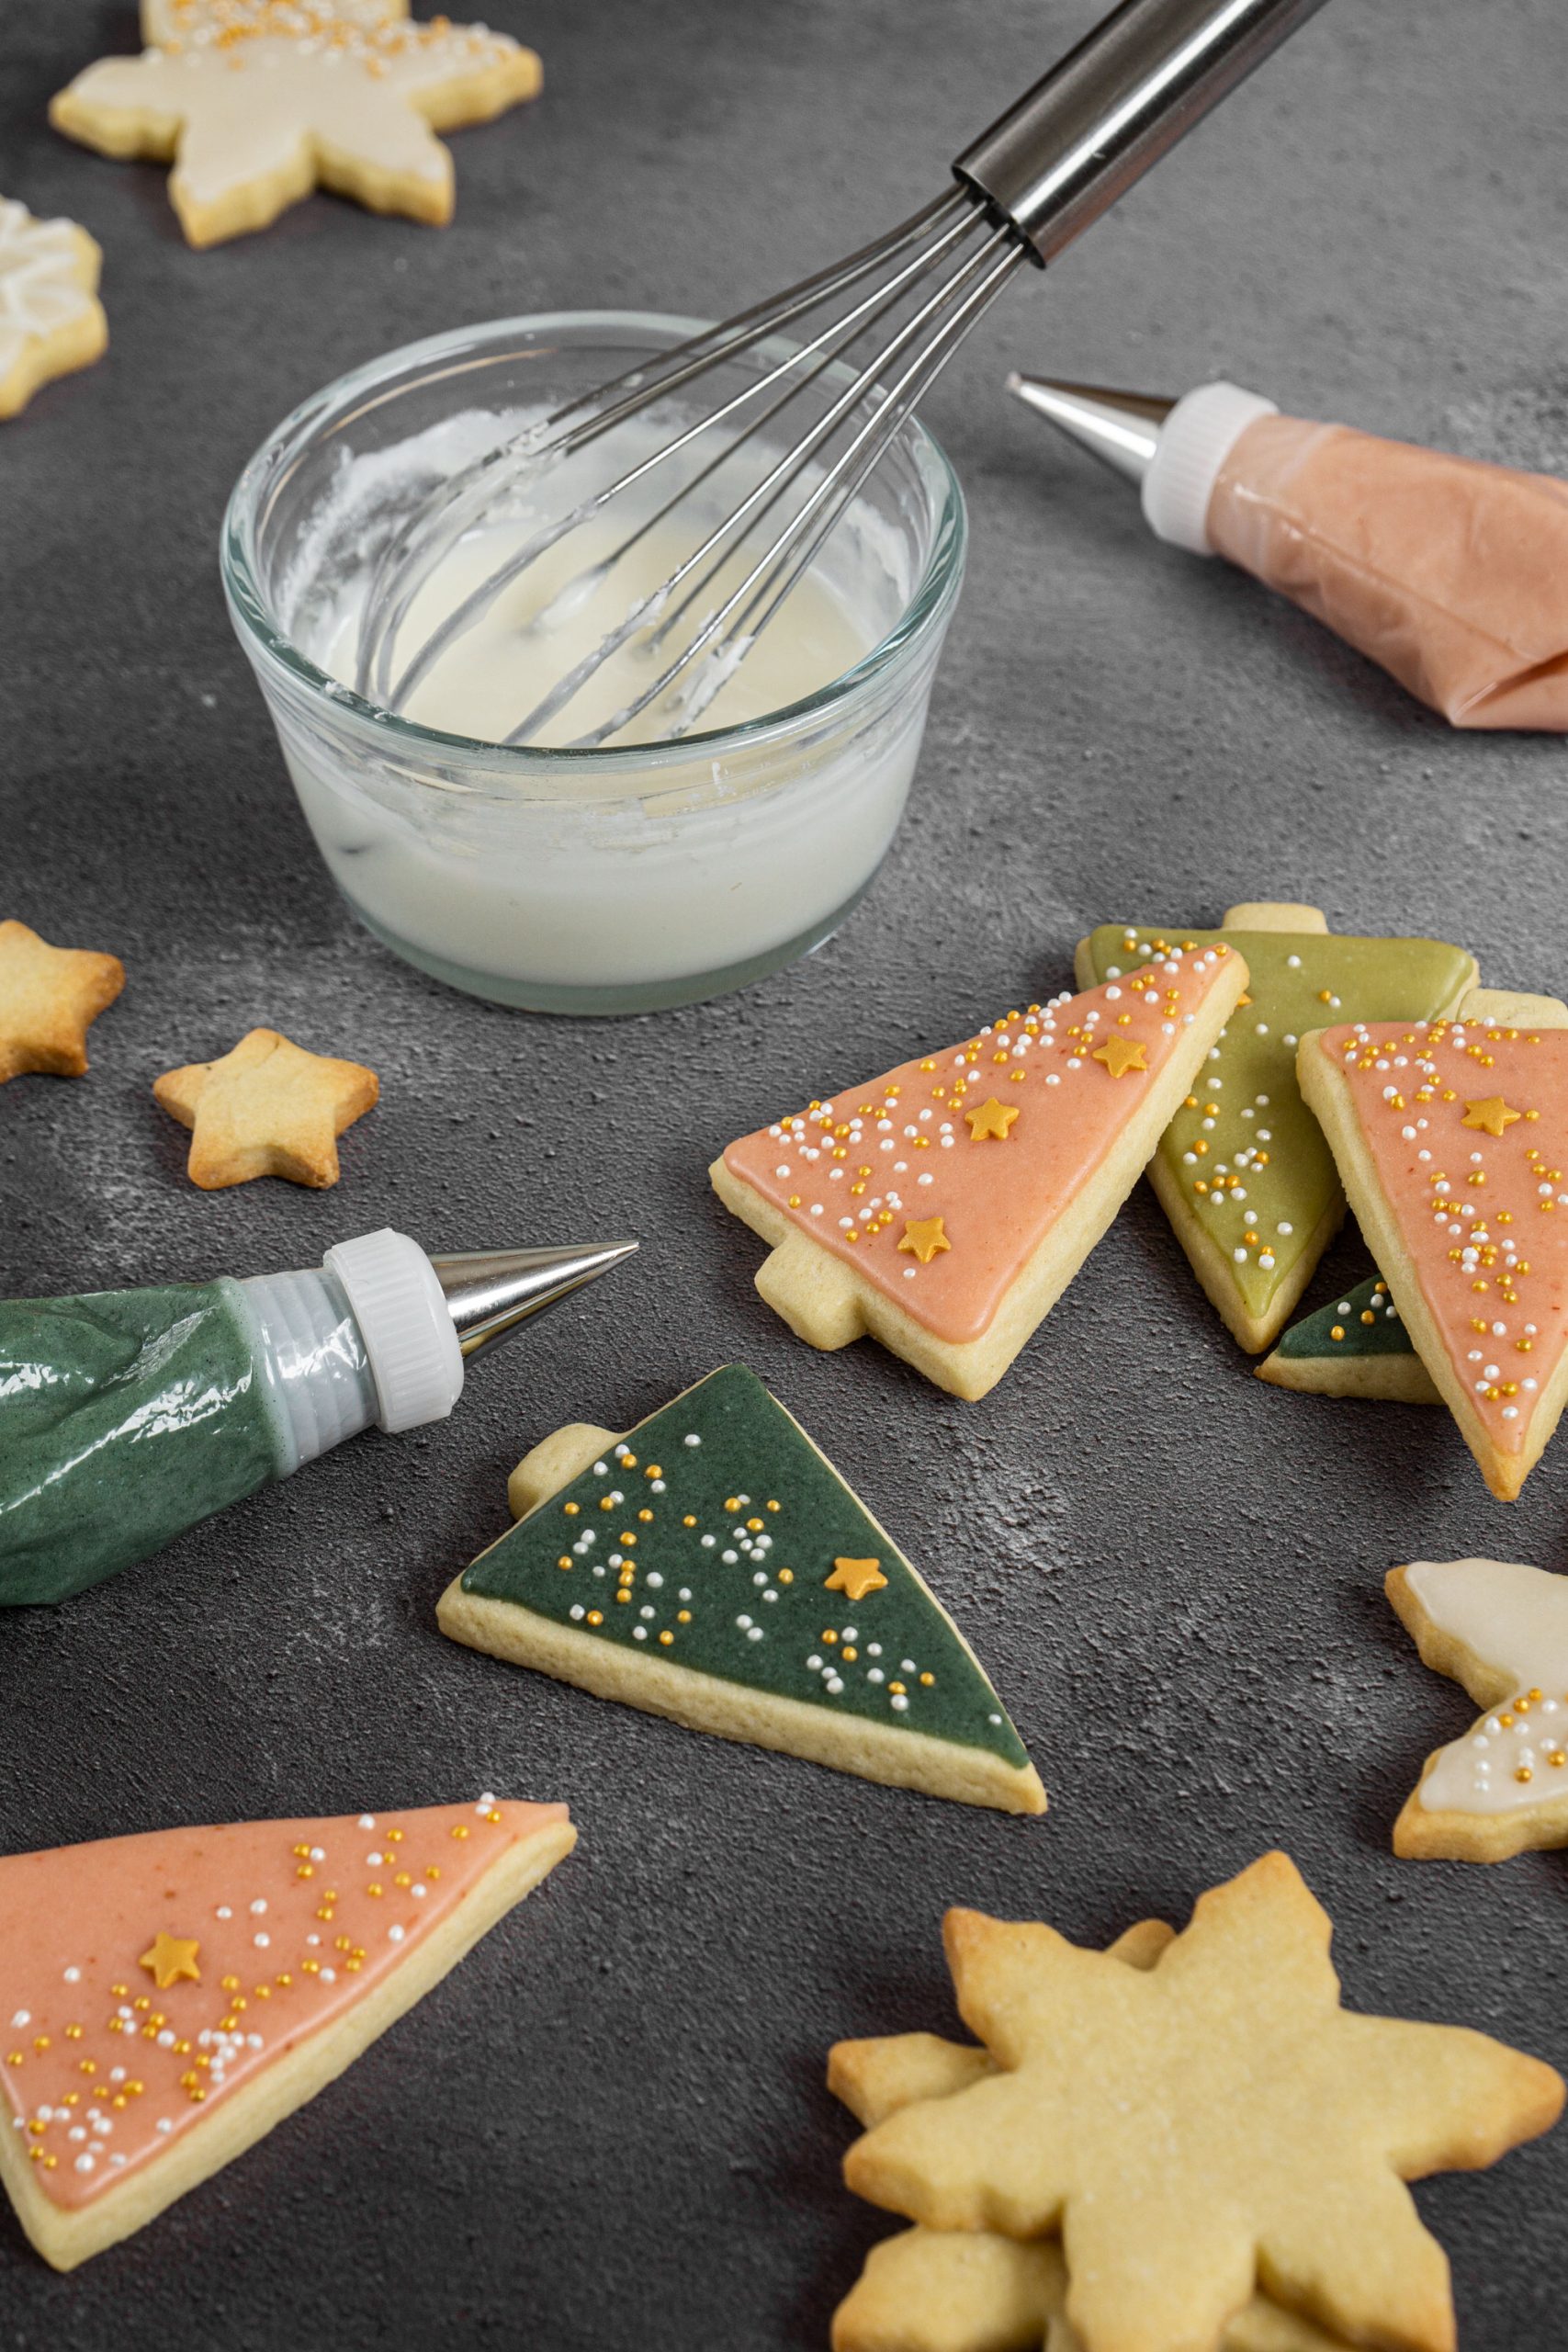 Fir tree shaped sugar cookies decorated with colorful cookie icing and gold sprinkles